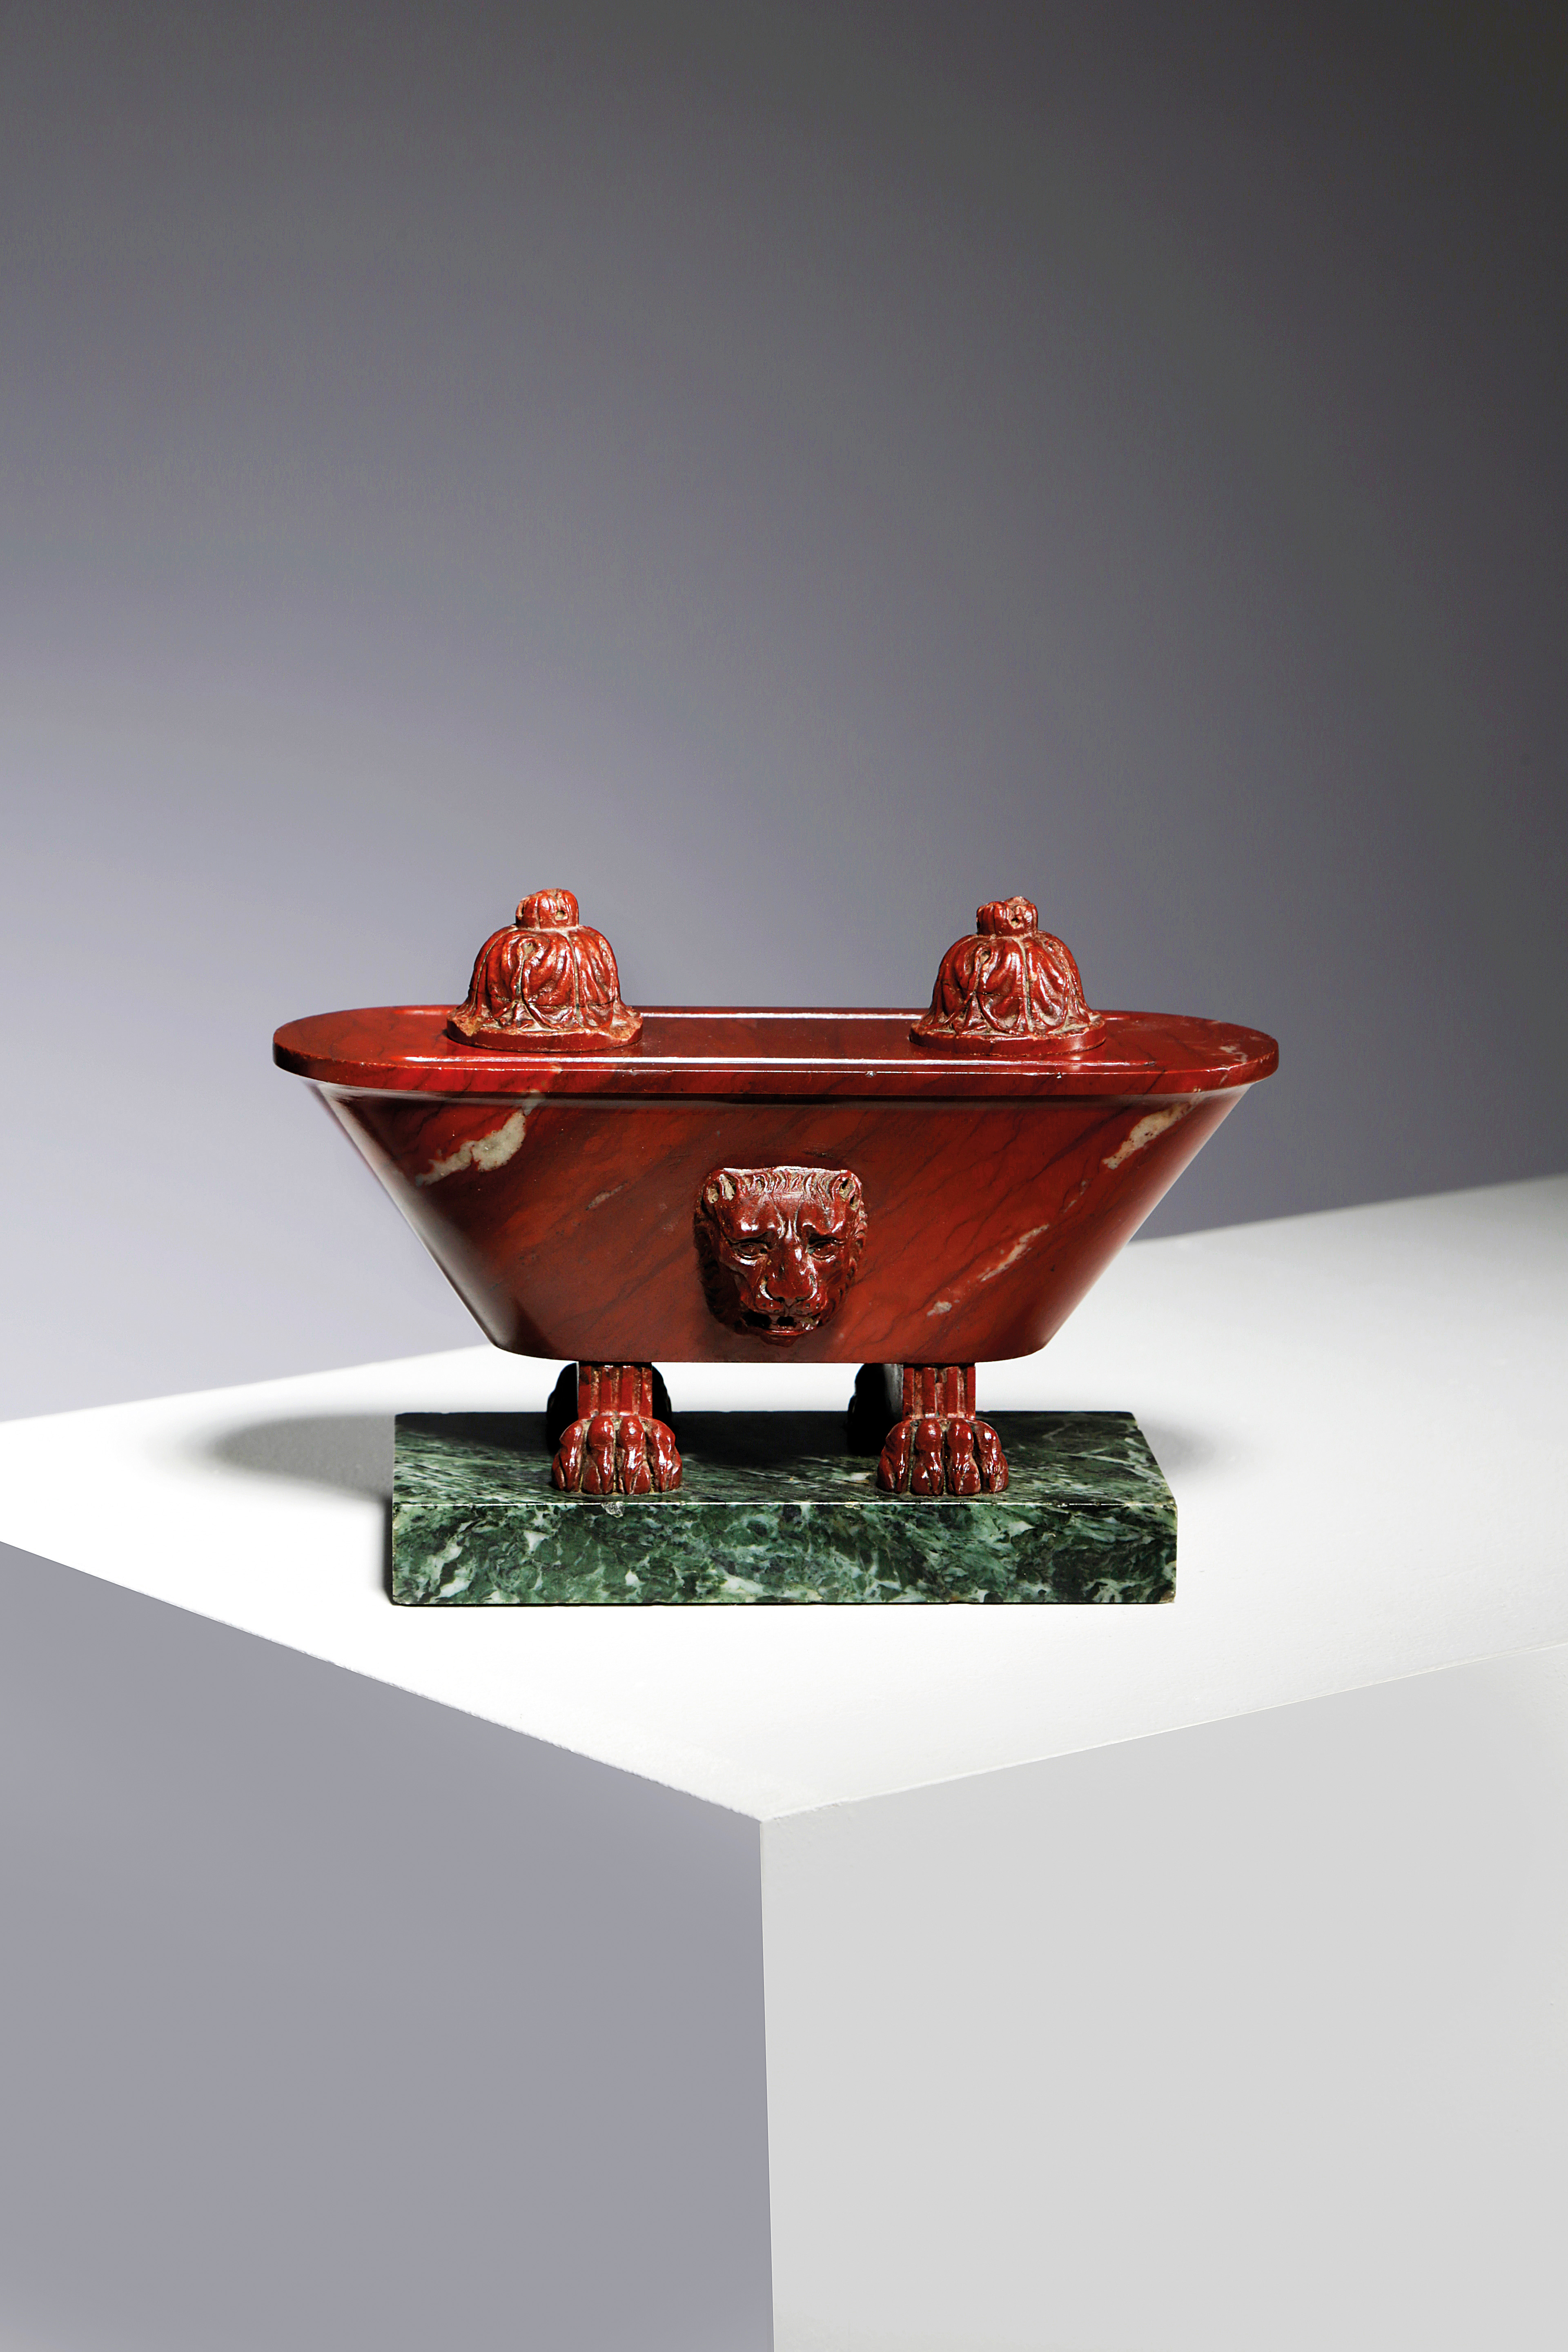 AN ITALIAN ROSSO ANTICO GRAND TOUR MARBLE INKWELL AFTER THE ANTIQUE, MID-19TH CENTURY in the form of